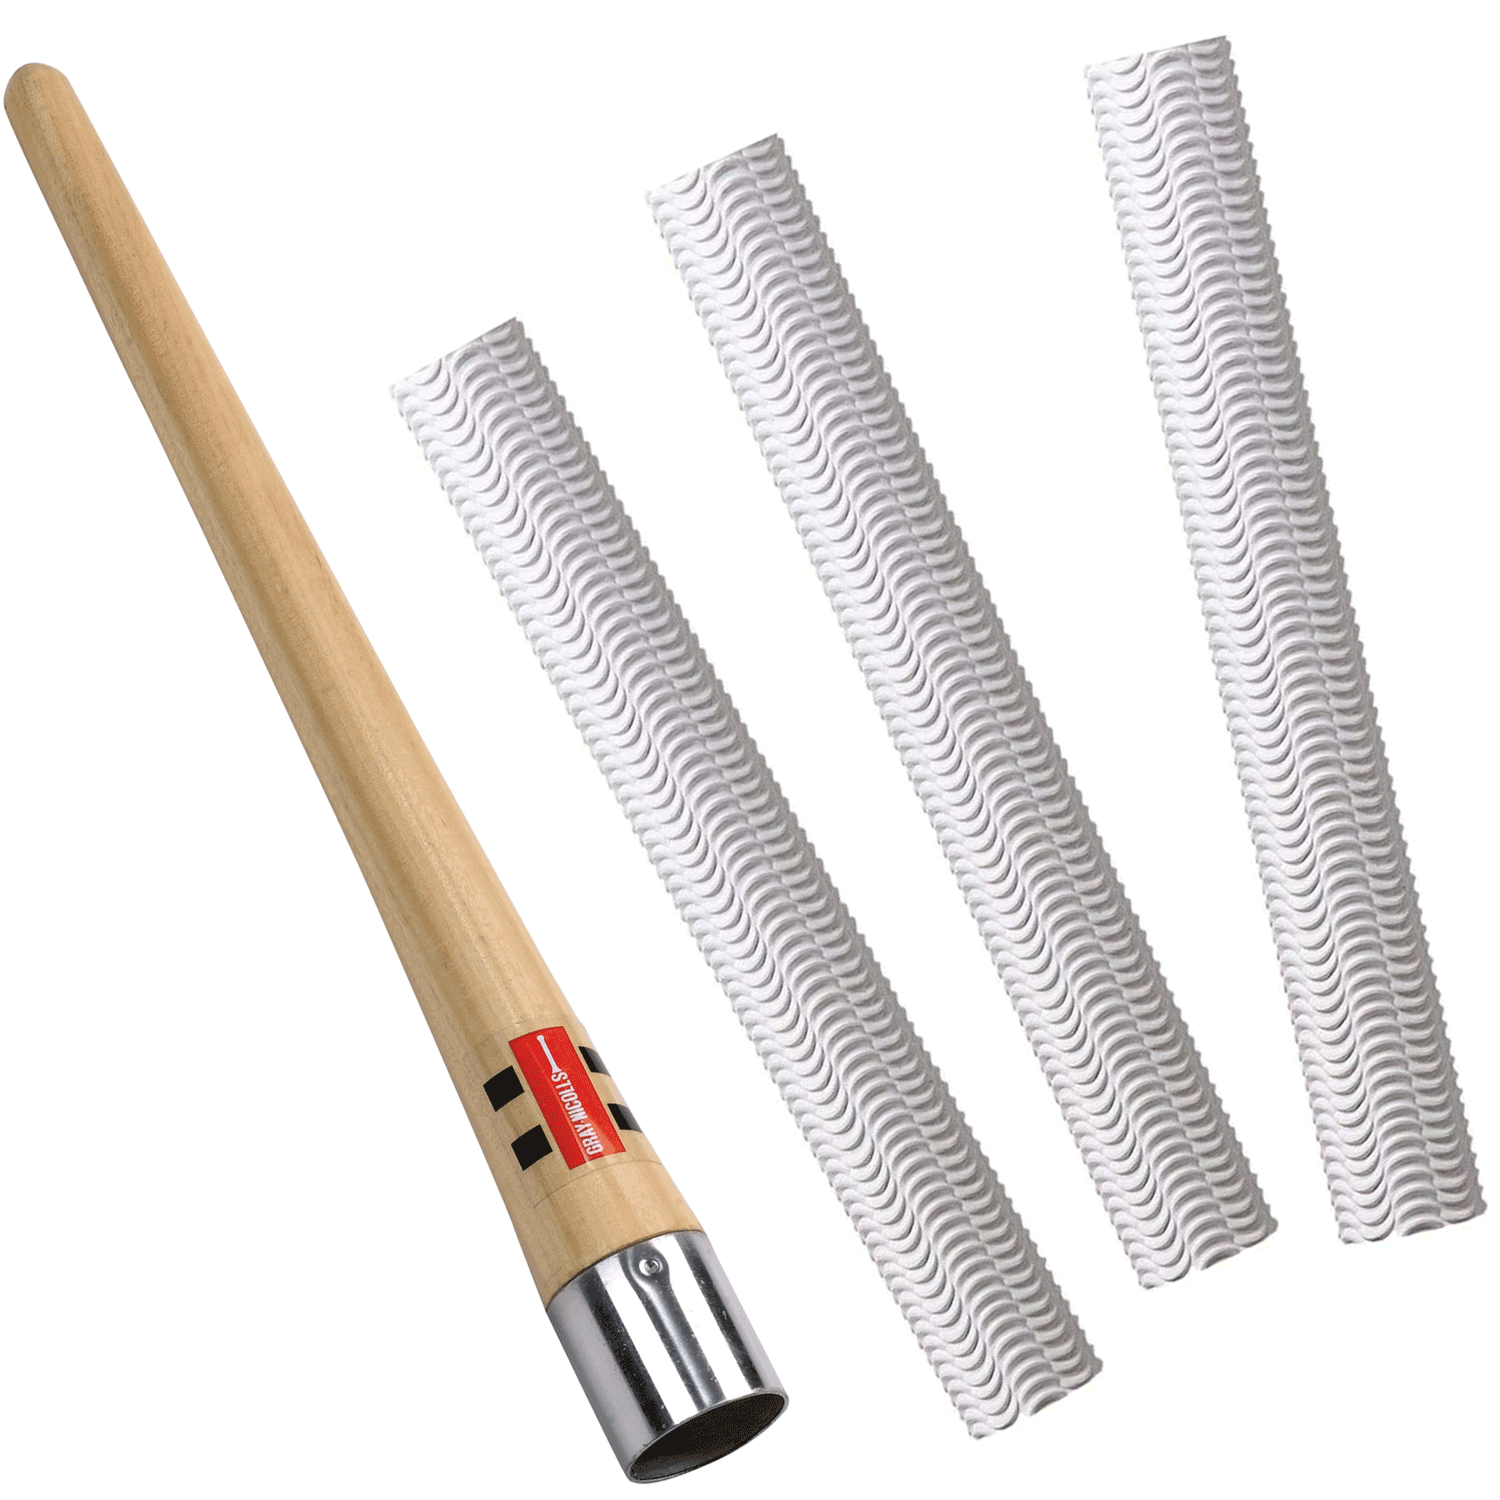 3 Pack of Cricket Batting Grips & Gripping Cone